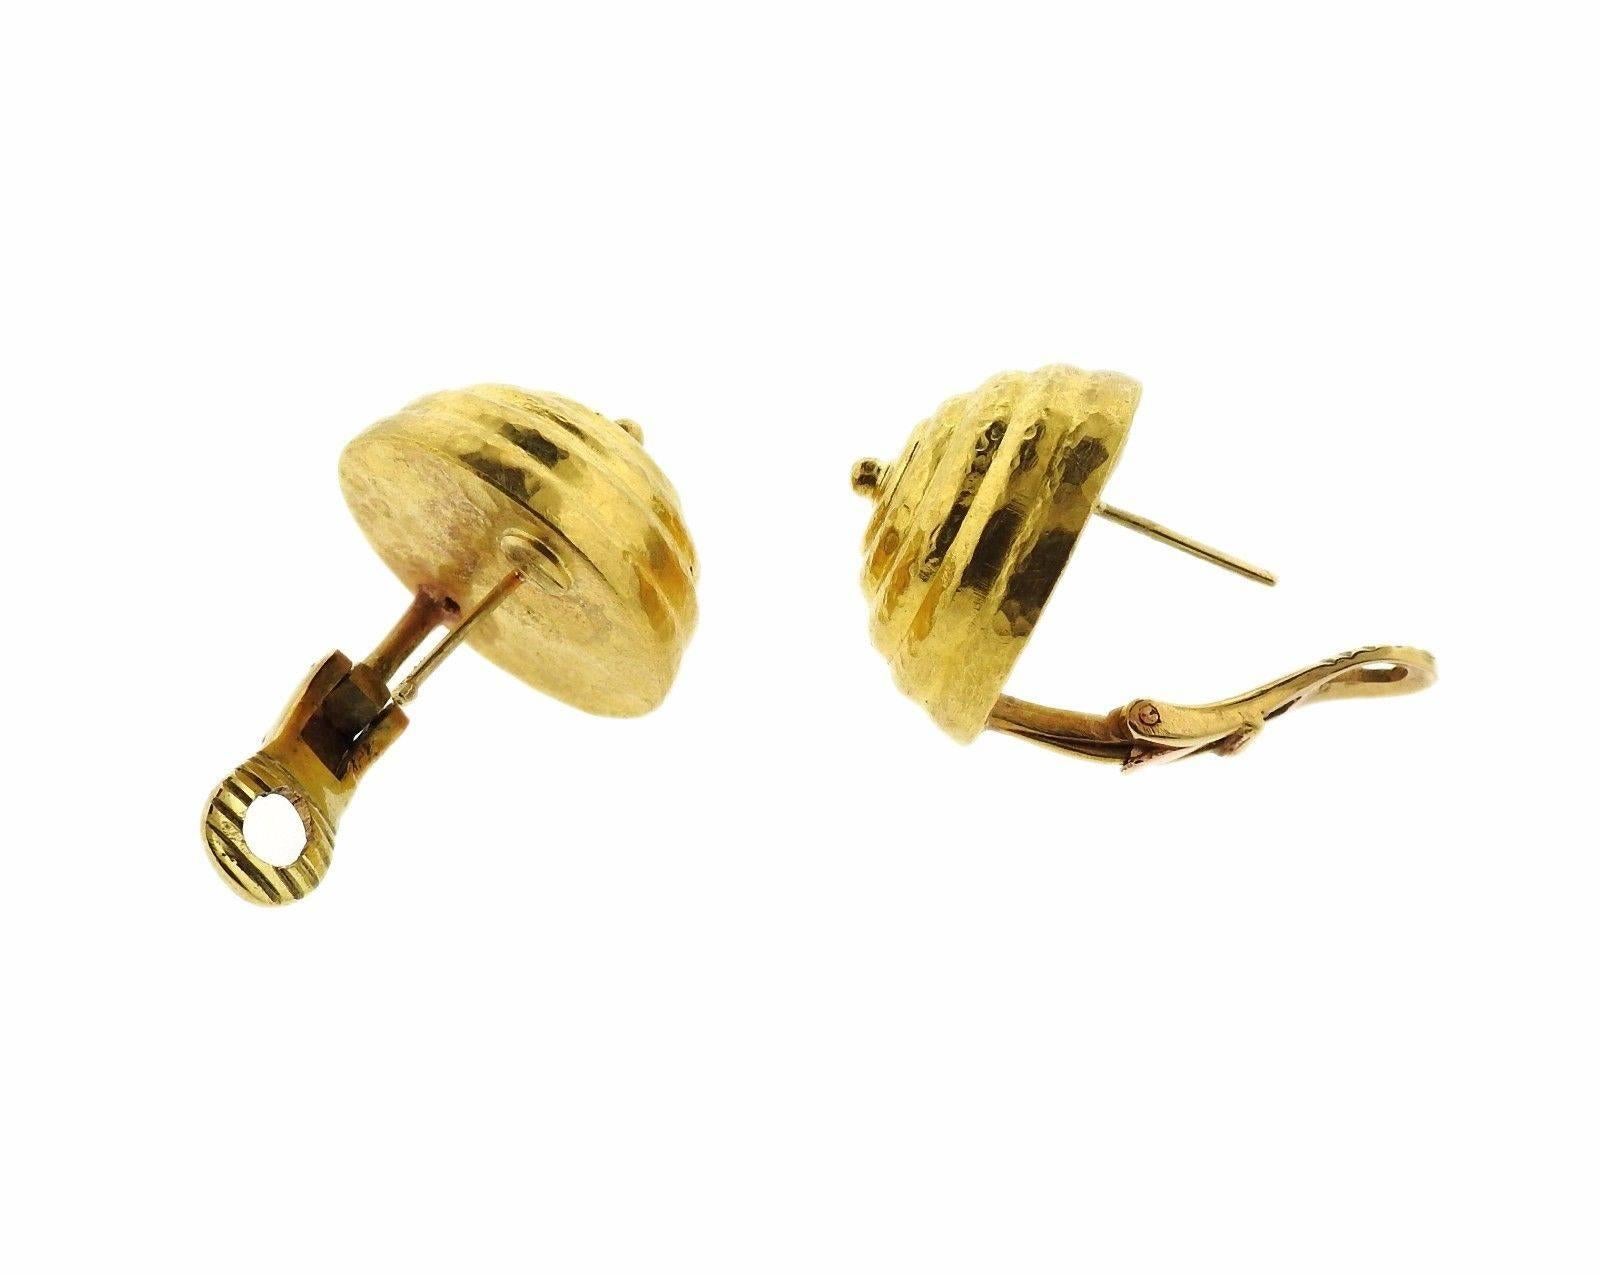 A pair of 18k gold behive earrings by Ilias Lalaounis.  The earrings measure 20.2mm in diameter.  The weight of the pair is 13.7 grams. Marked: A21, 750.